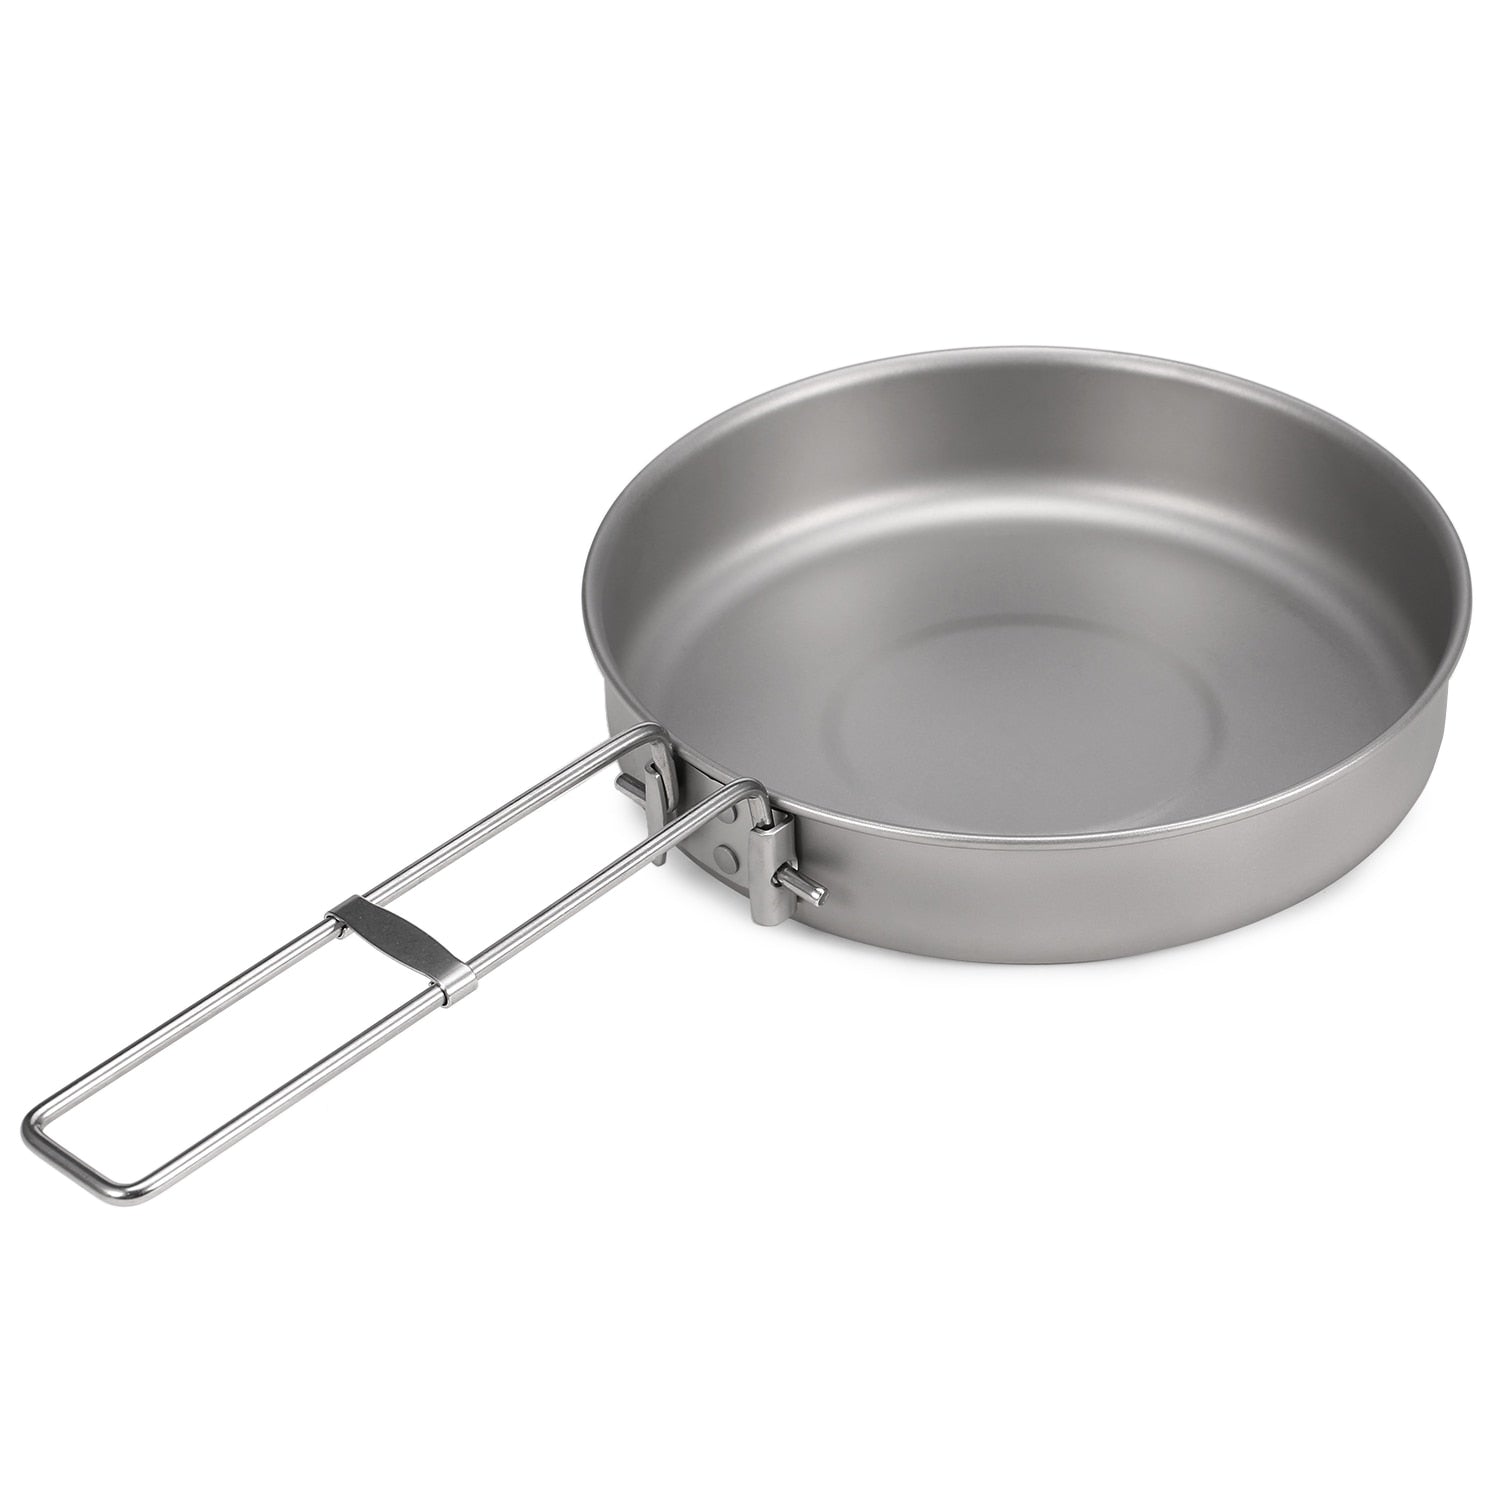 Titanium Frypan with Foldable Handle Ultralight Outdoor Camping Frying Pan